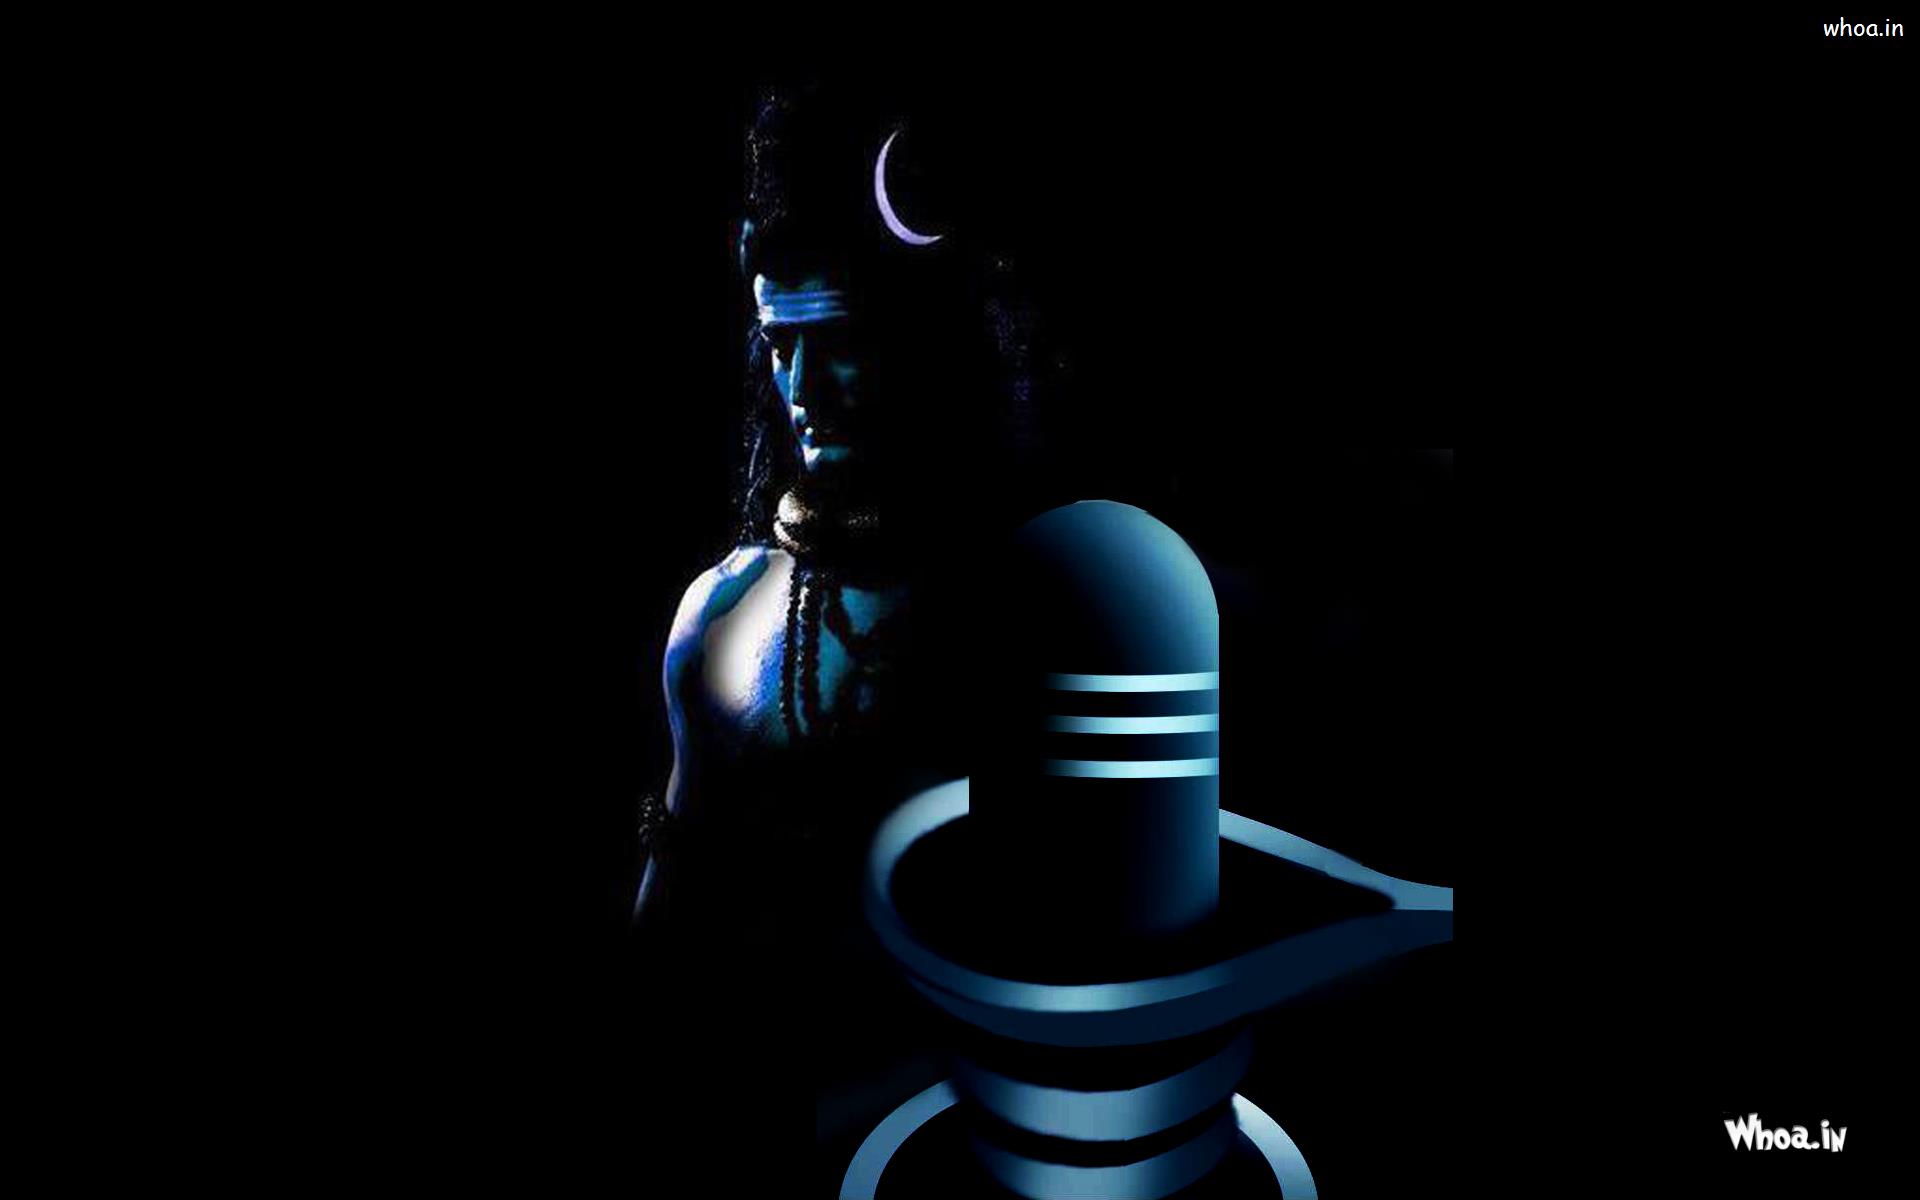 Lord Shiva Lingam Hd Wallpapers For Mobile